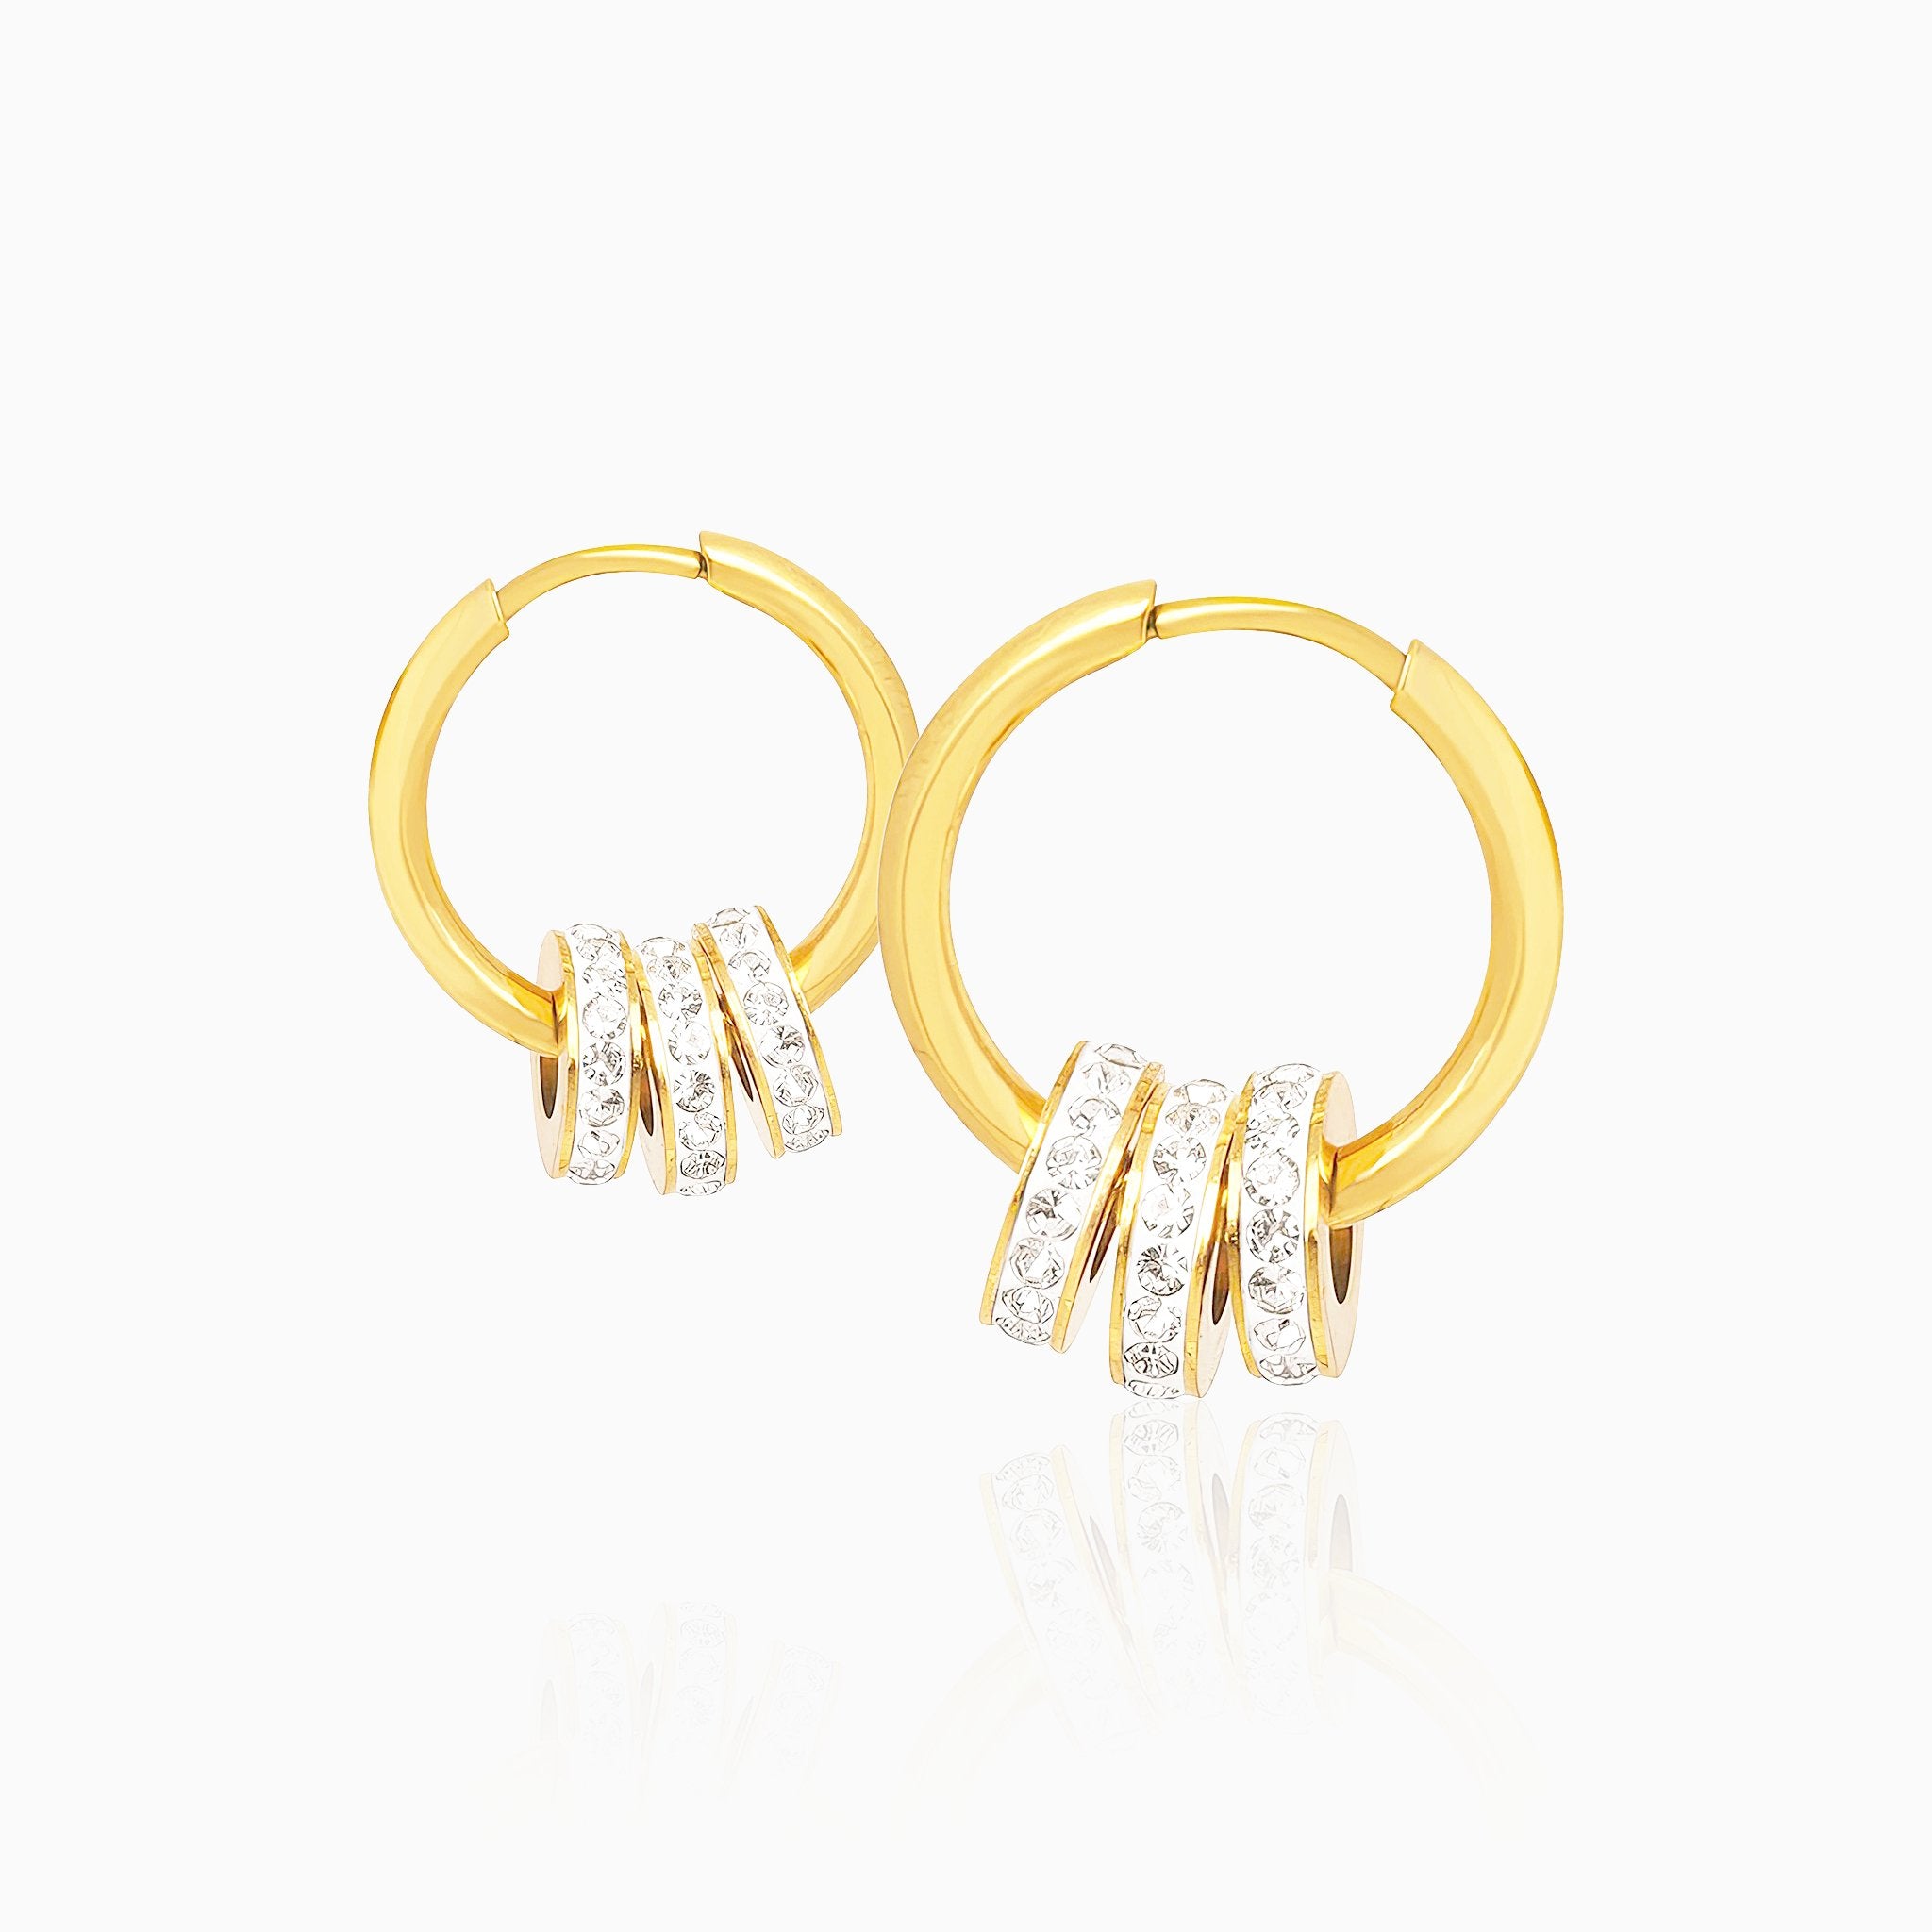 Dazzling Ring Earrings with Studded Circles - Nobbier - Earrings - 18K Gold And Titanium PVD Coated Jewelry